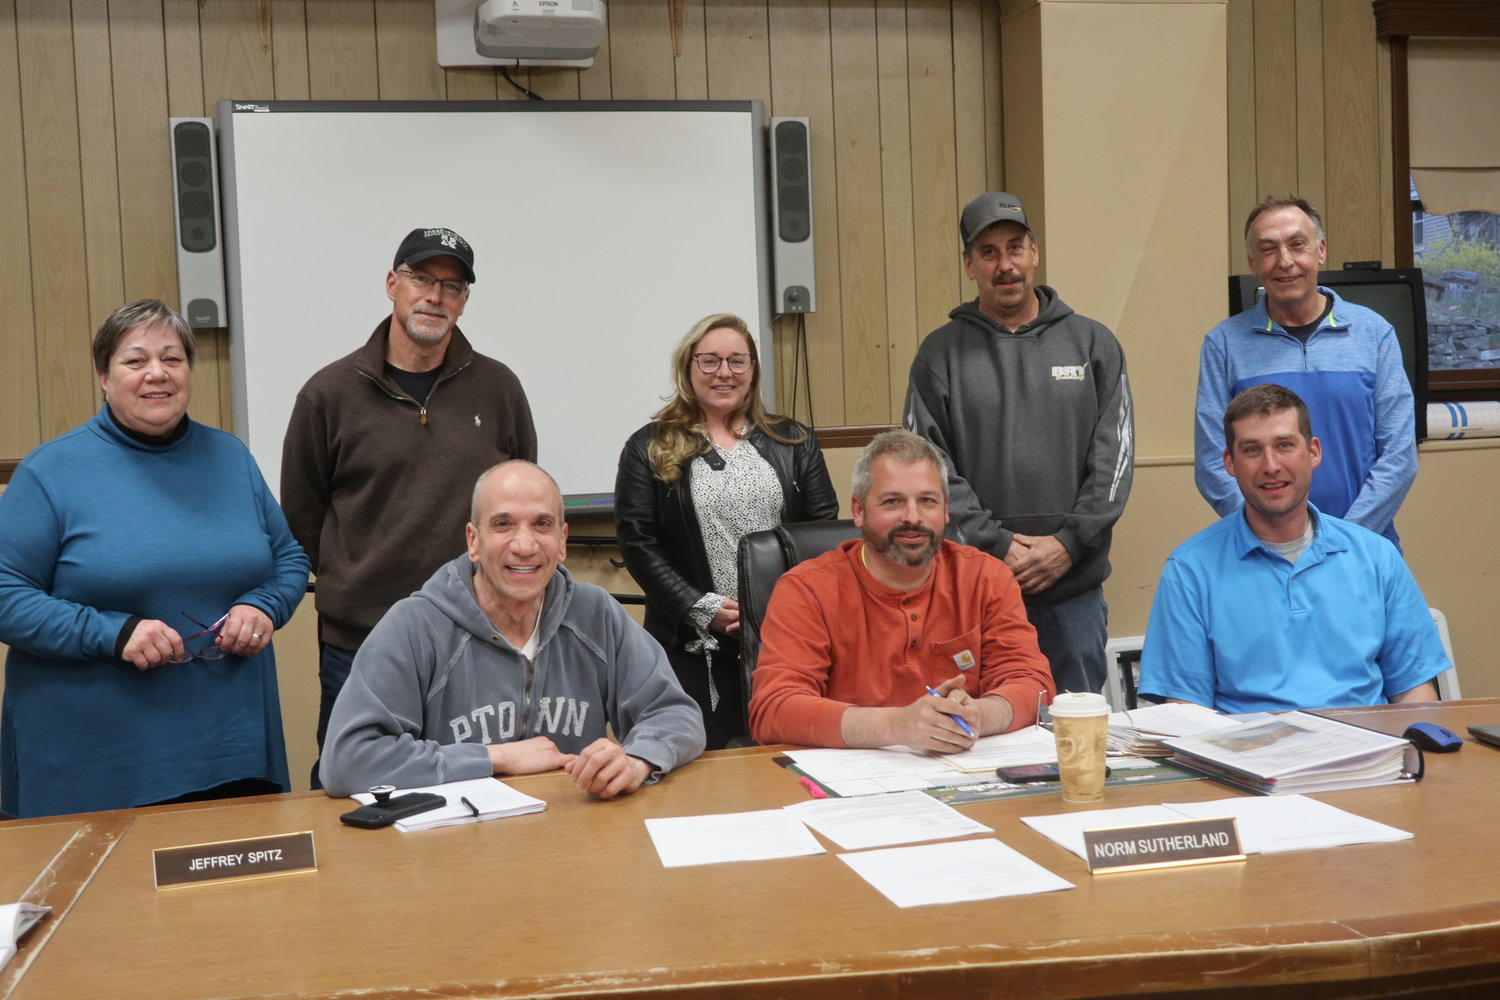 The newly seated Highland Planning Board makes quick work at its April 27 meeting. At its May 25 meeting, they will be reviewing project details of Northgate/Kittatinny.